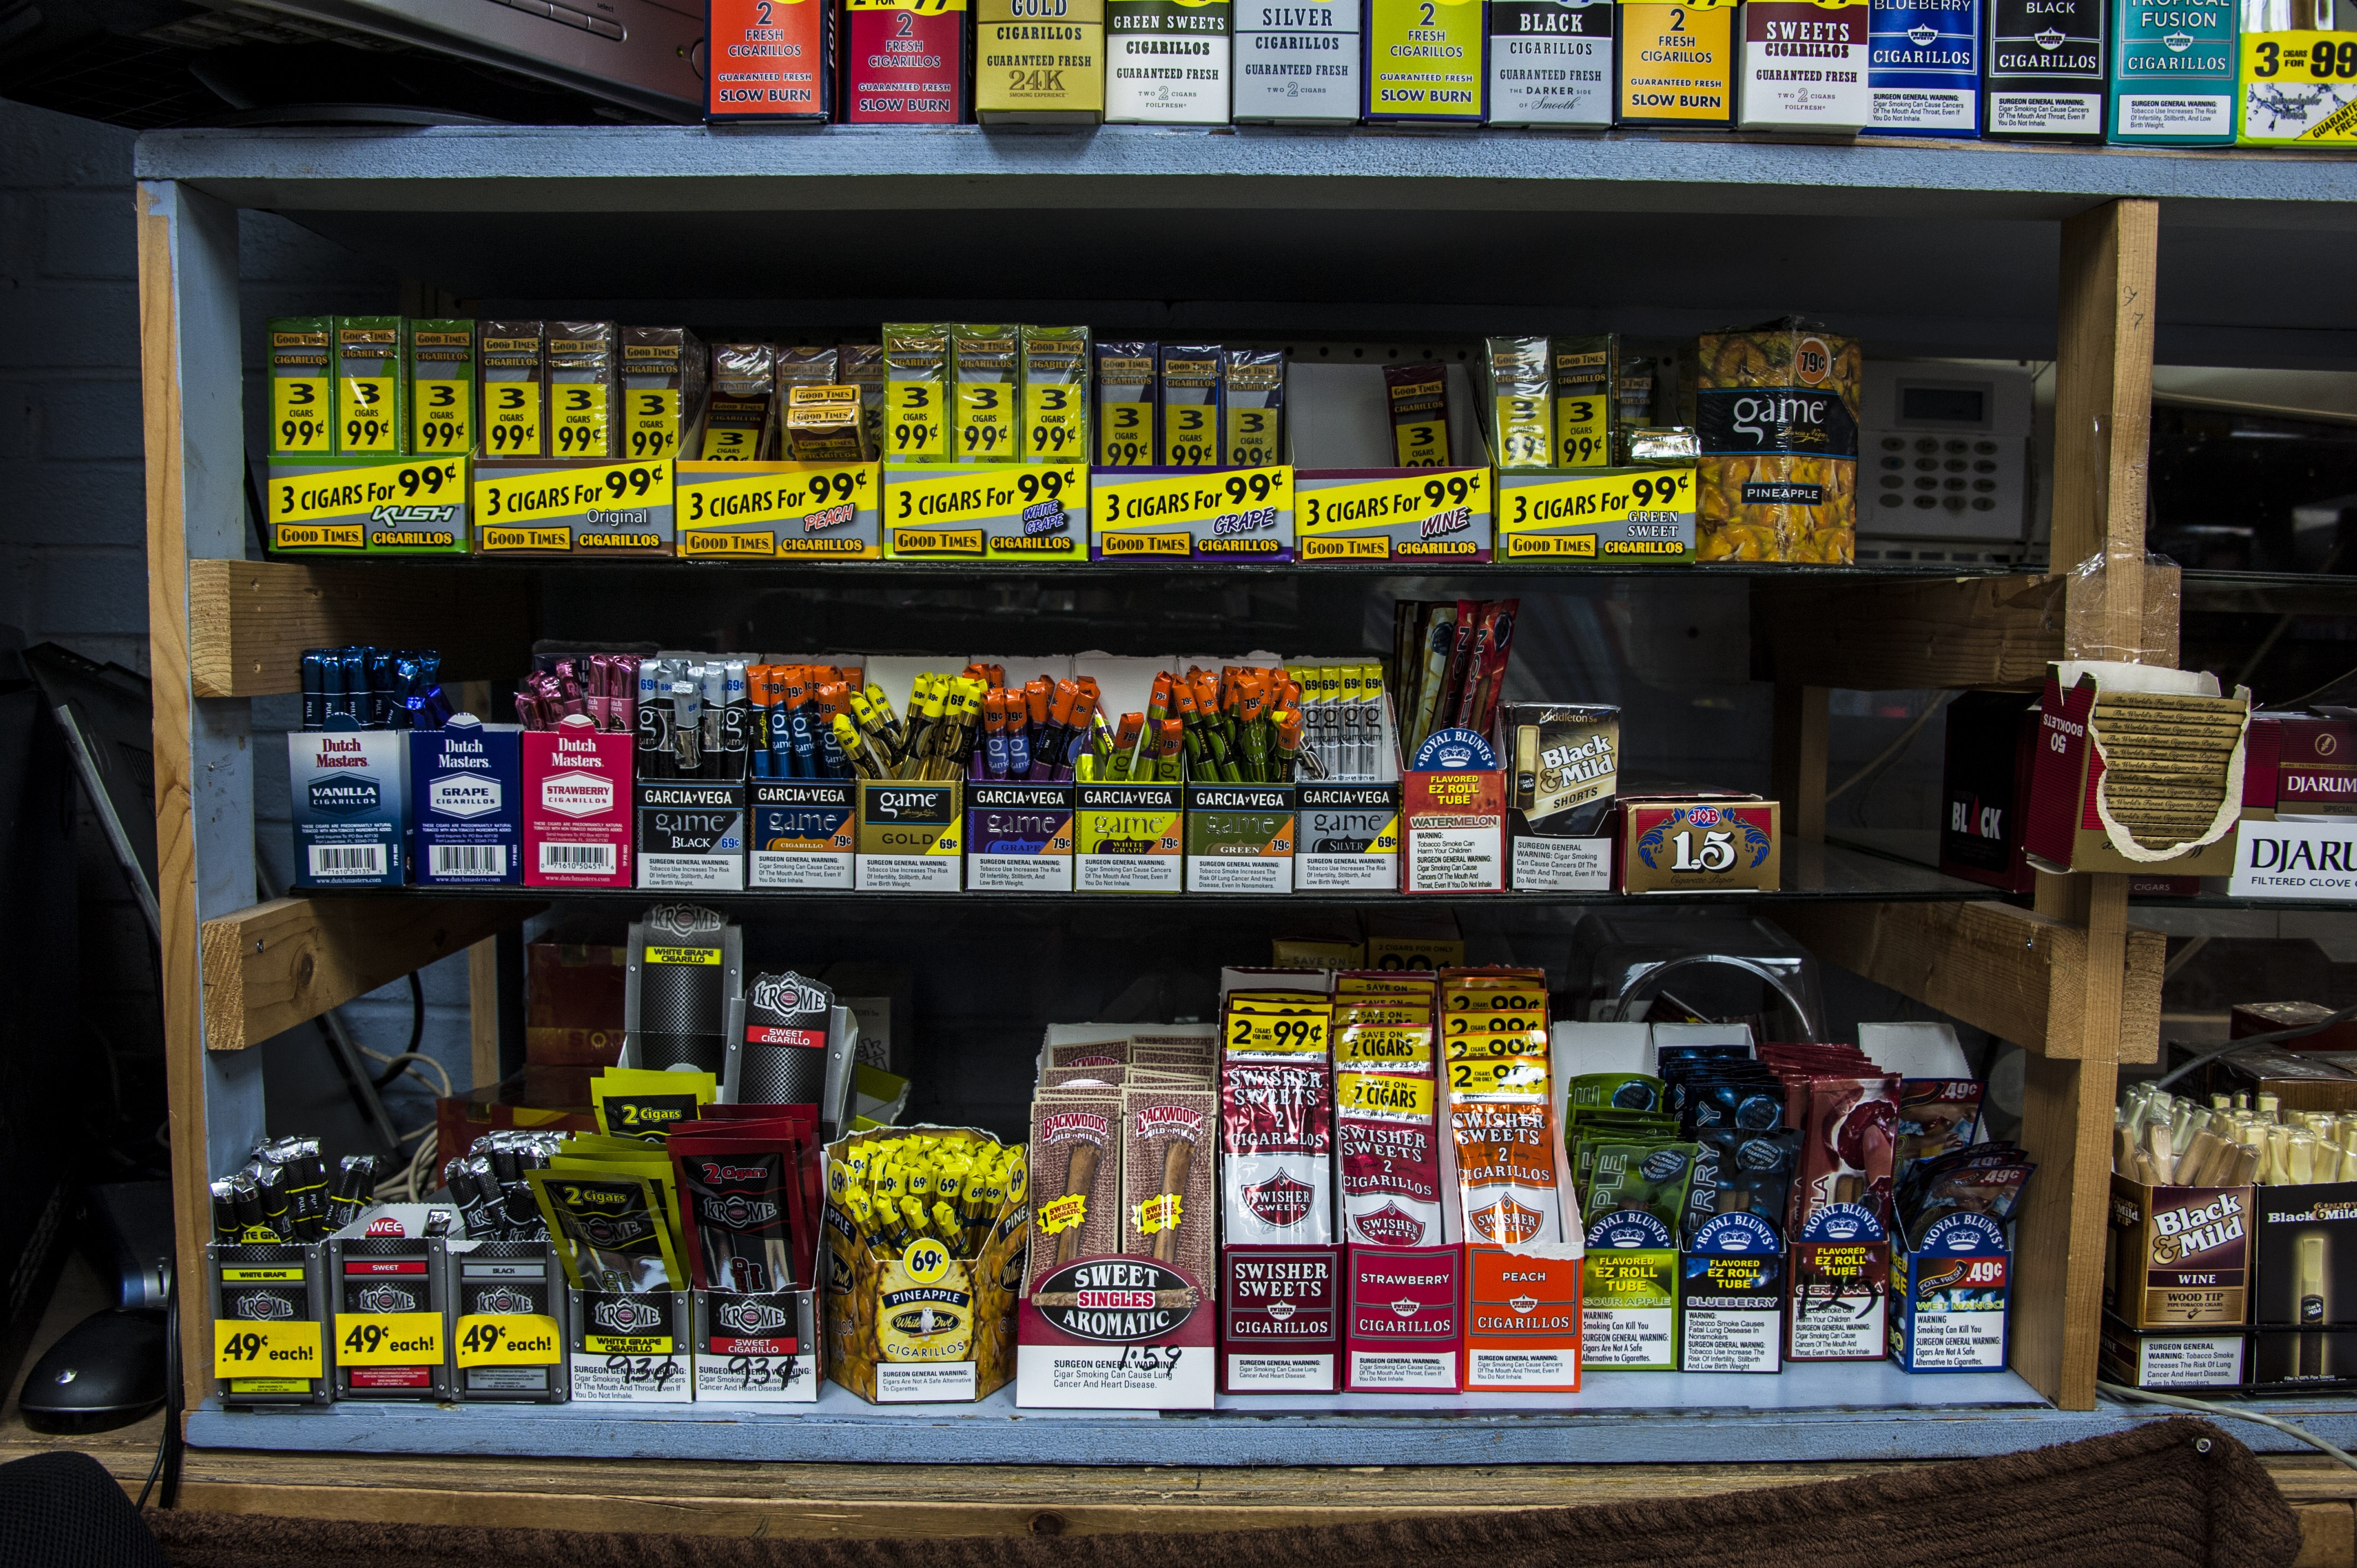 Flavored tobacco products like these can now only be sold in adult-only stores in Shorewood, MN 